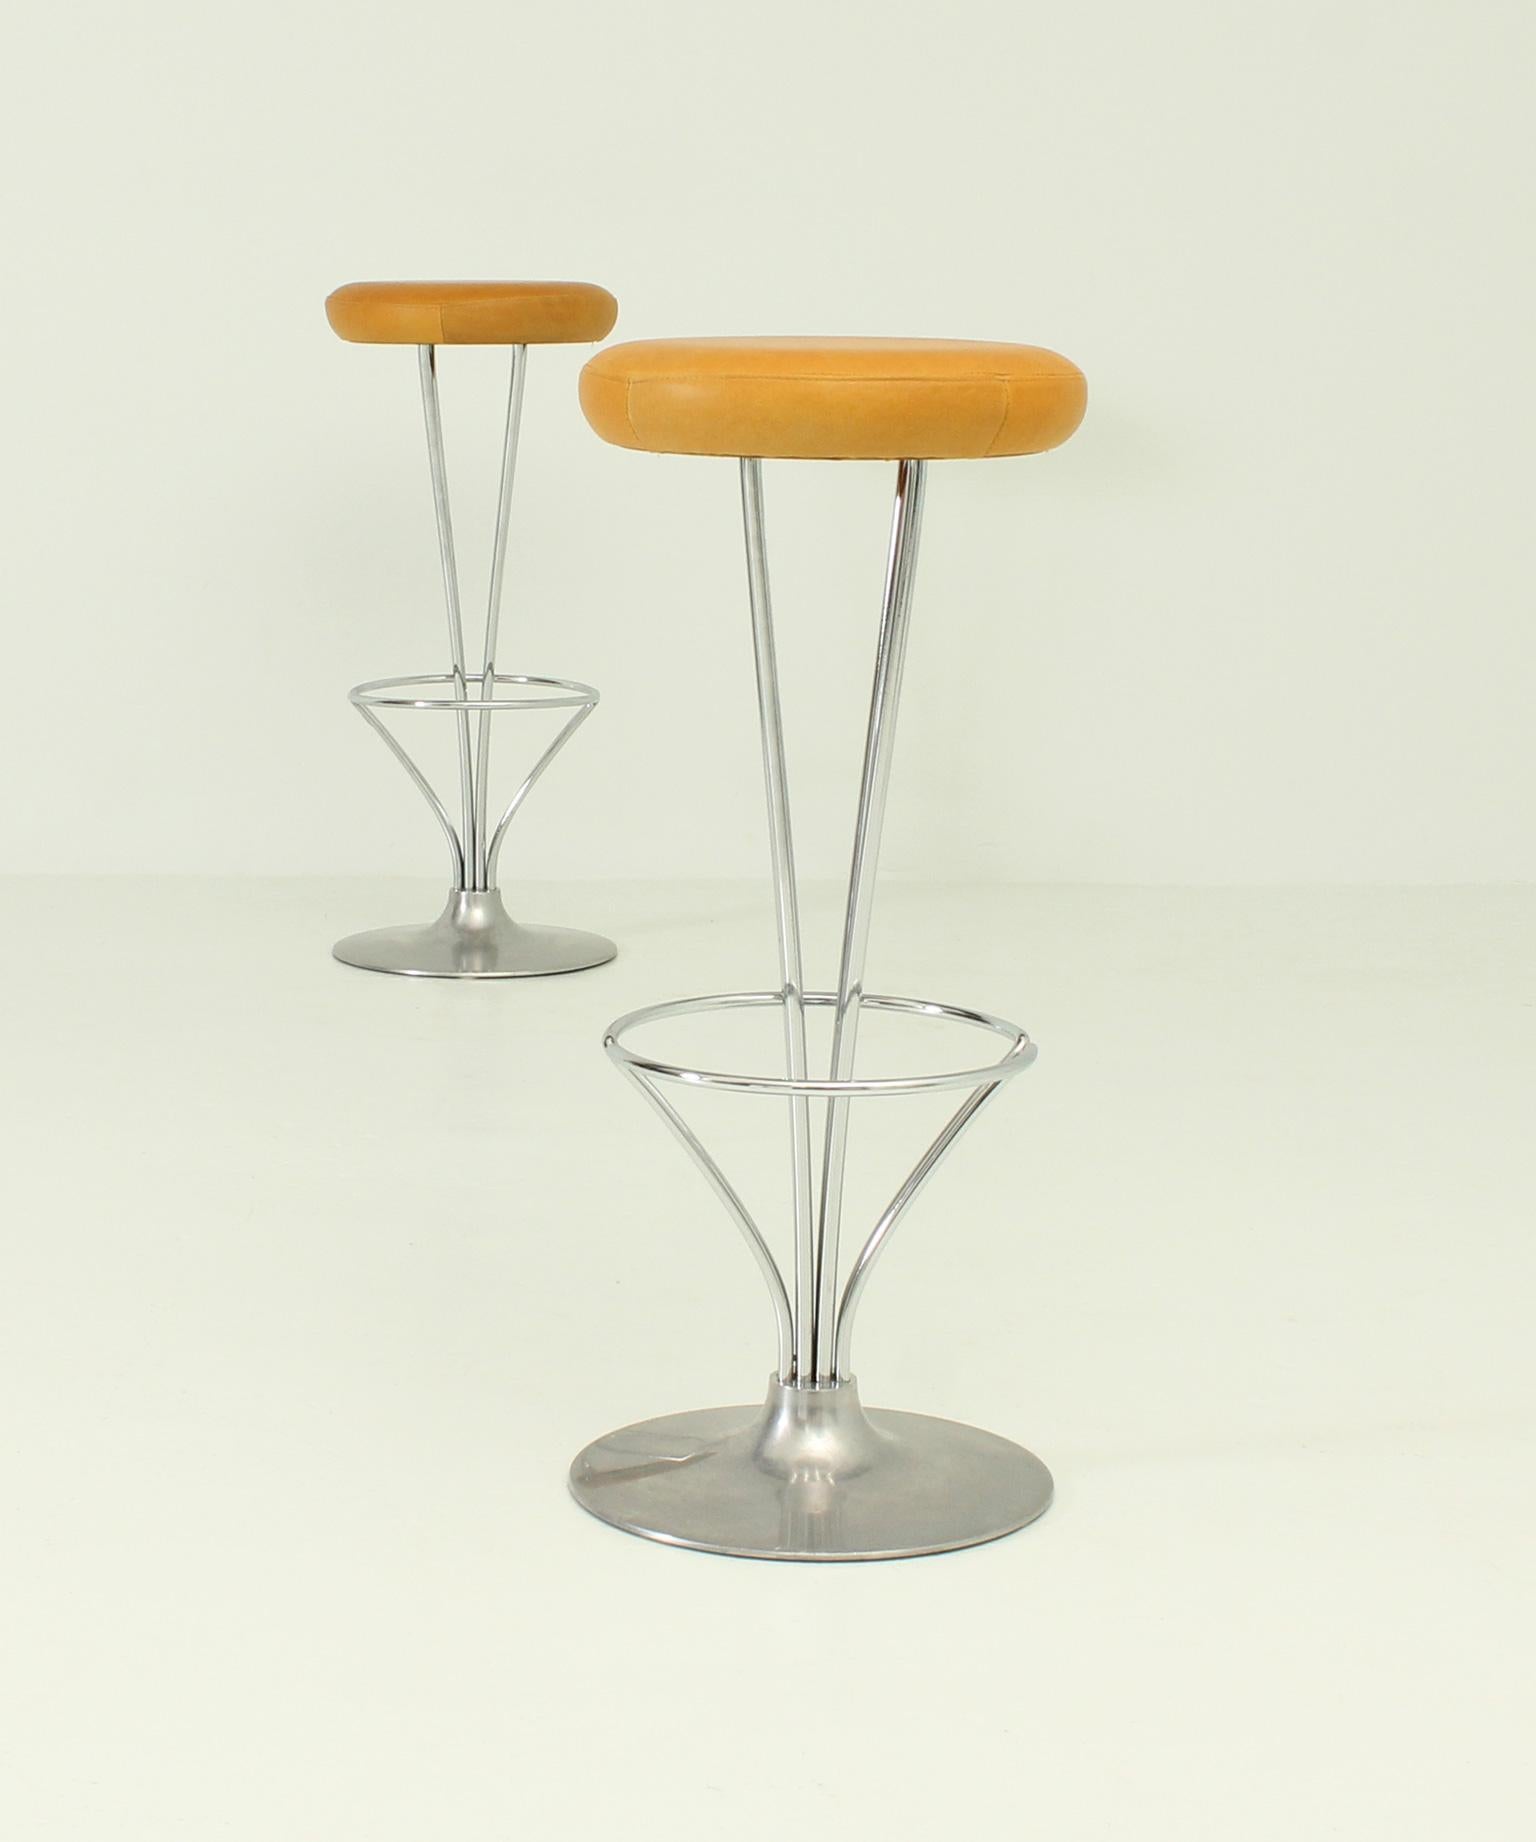 Pair of stools designed in 1968 by Piet Hein as part of the Superellipse table series for Fritz Hansen, Denmark. Chromed and brushed steel bases and leather seats.